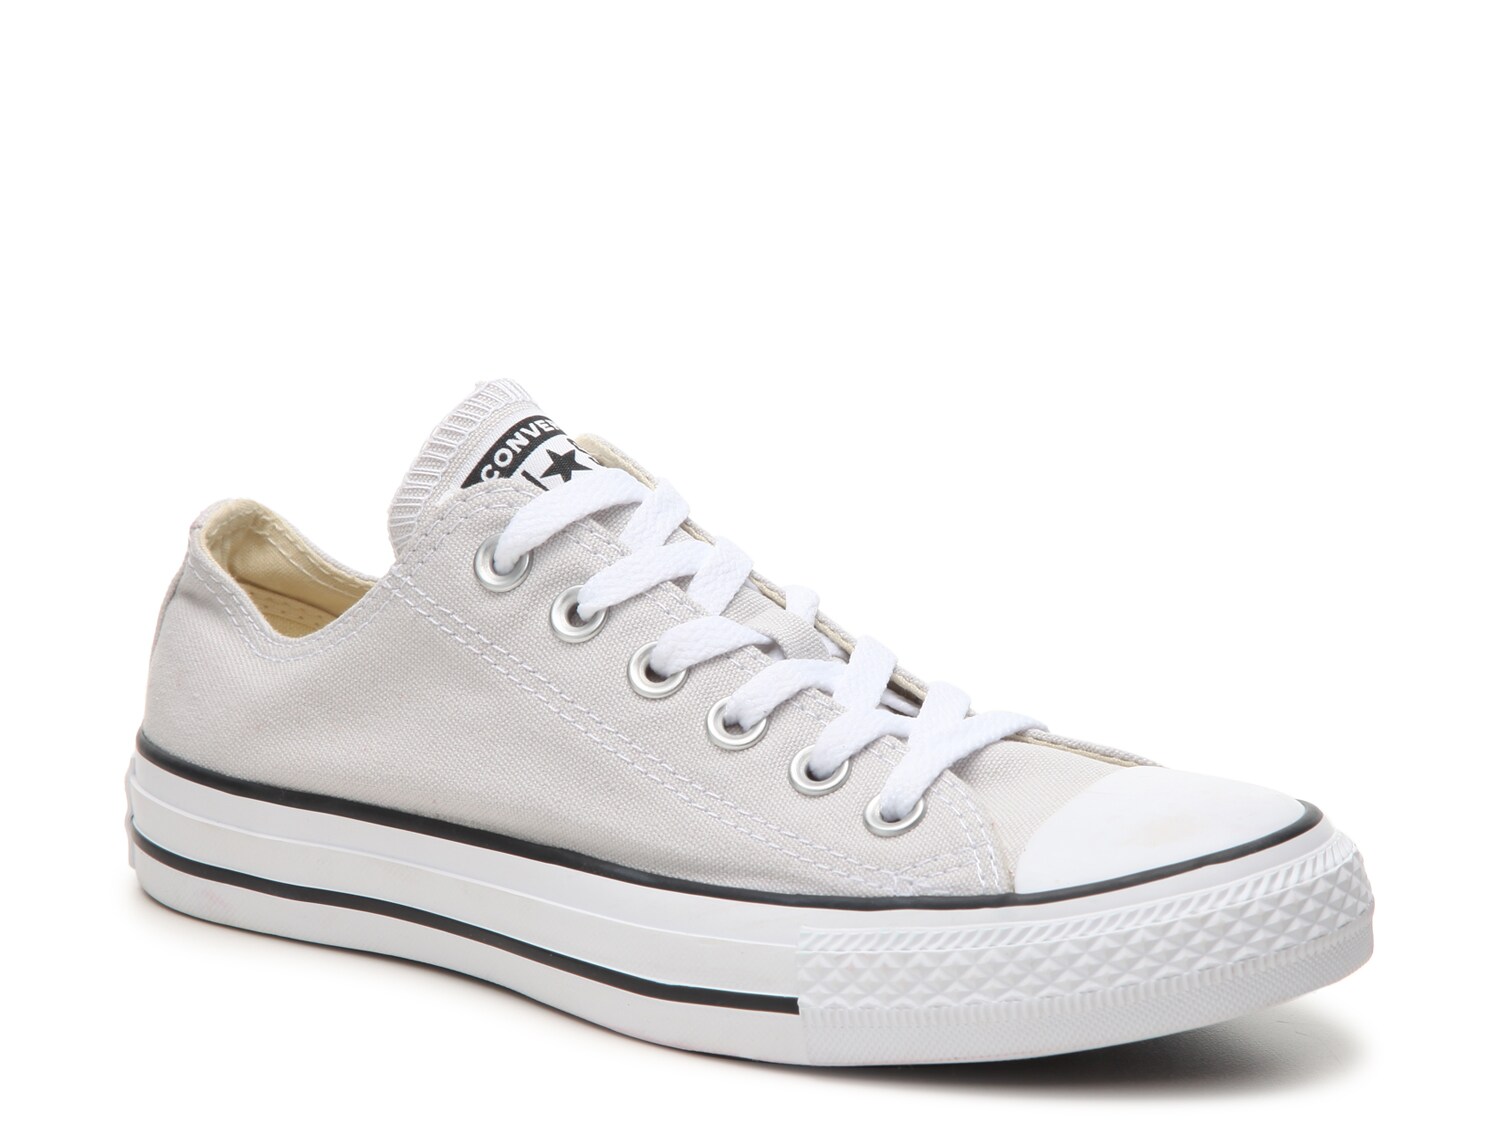 Converse Chuck Taylor All Star Ox Sneaker - Men's - Free Shipping | DSW